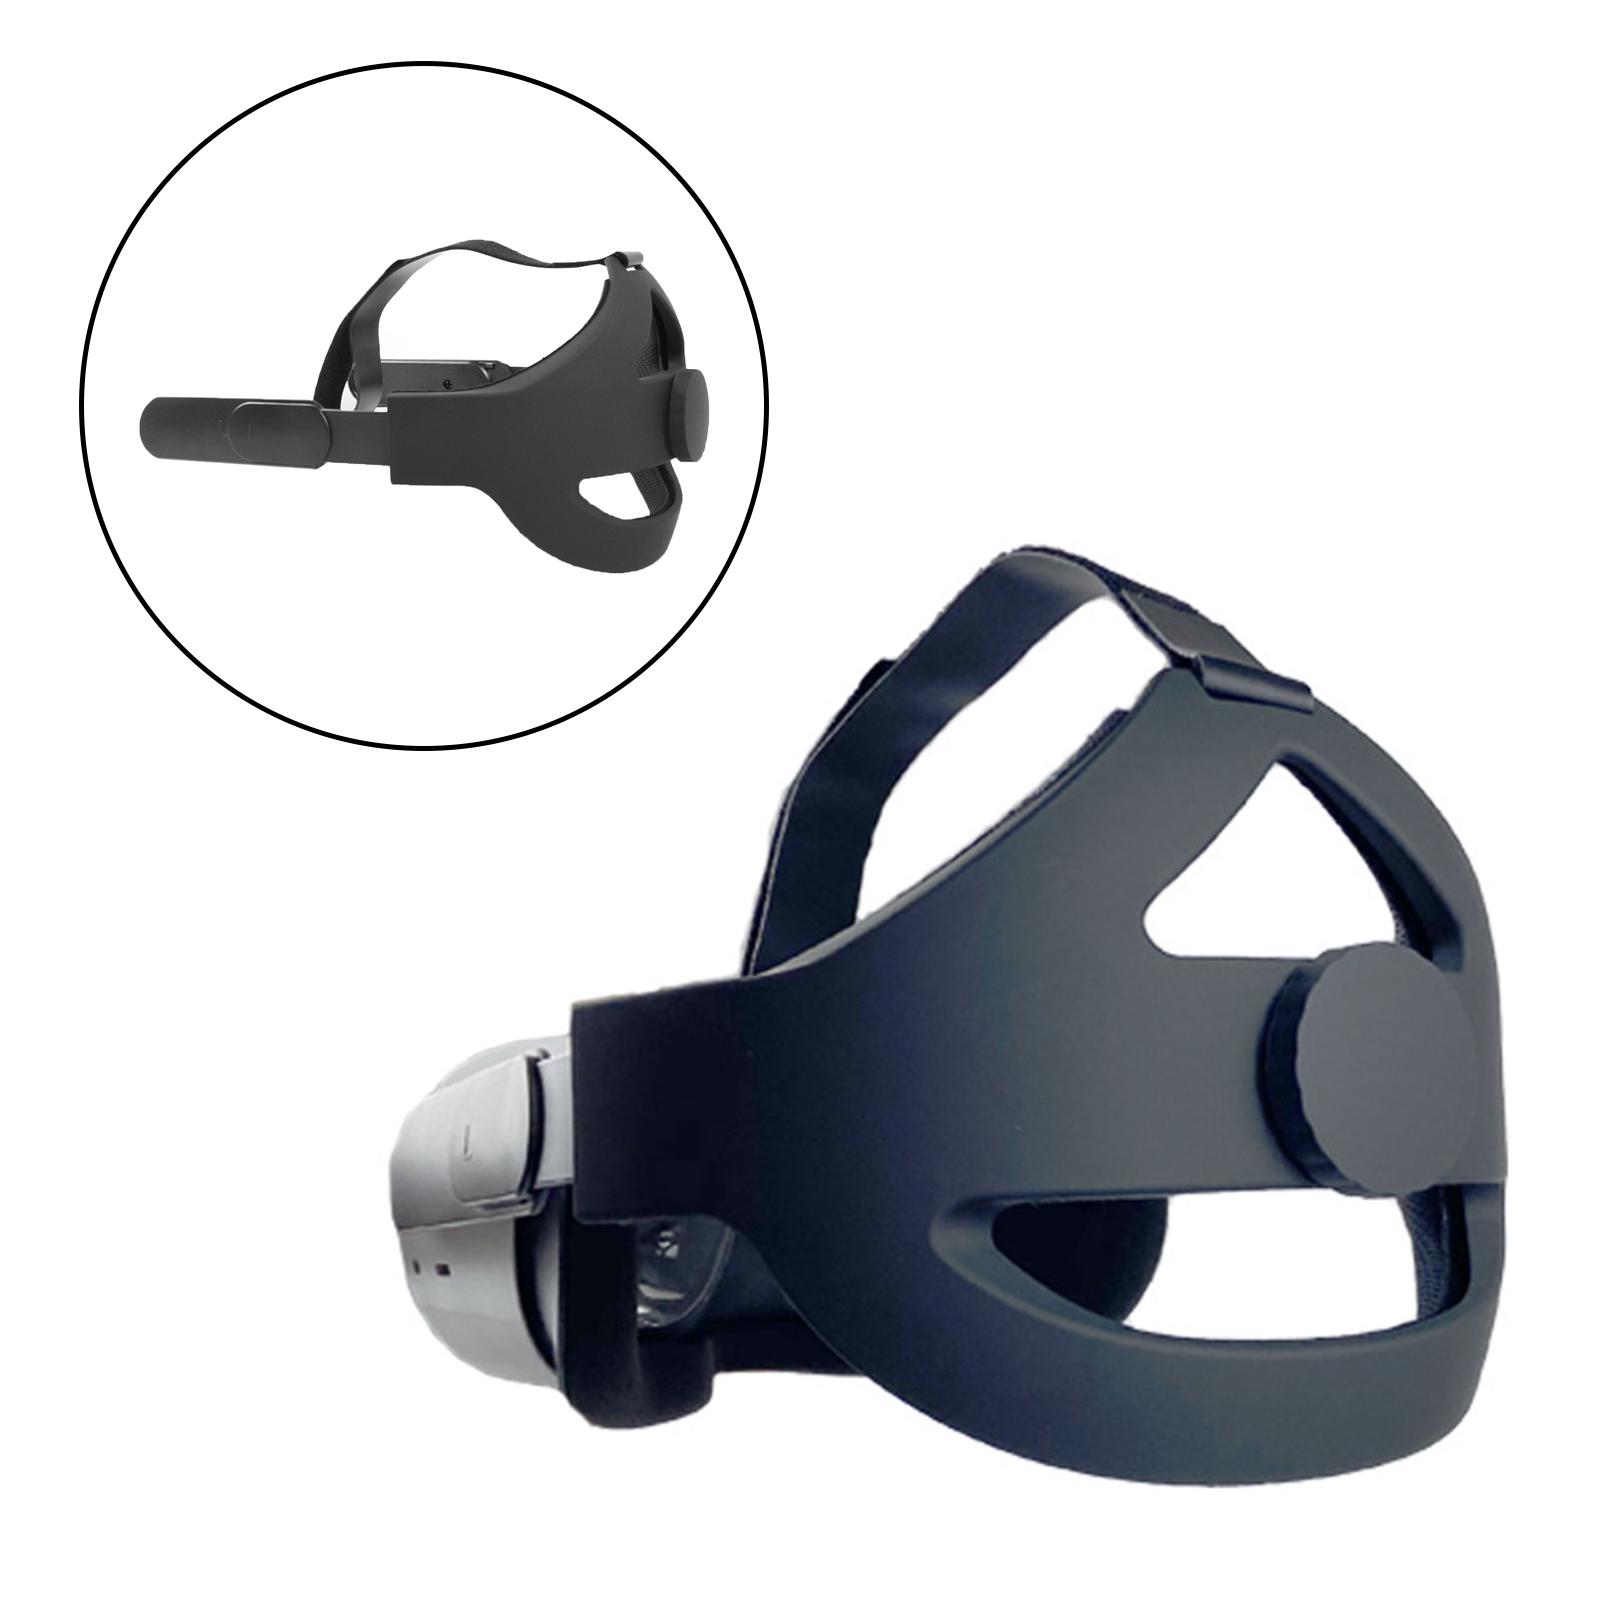 for Quest 2 VR Headset Headband Replace Comfort Improved Support